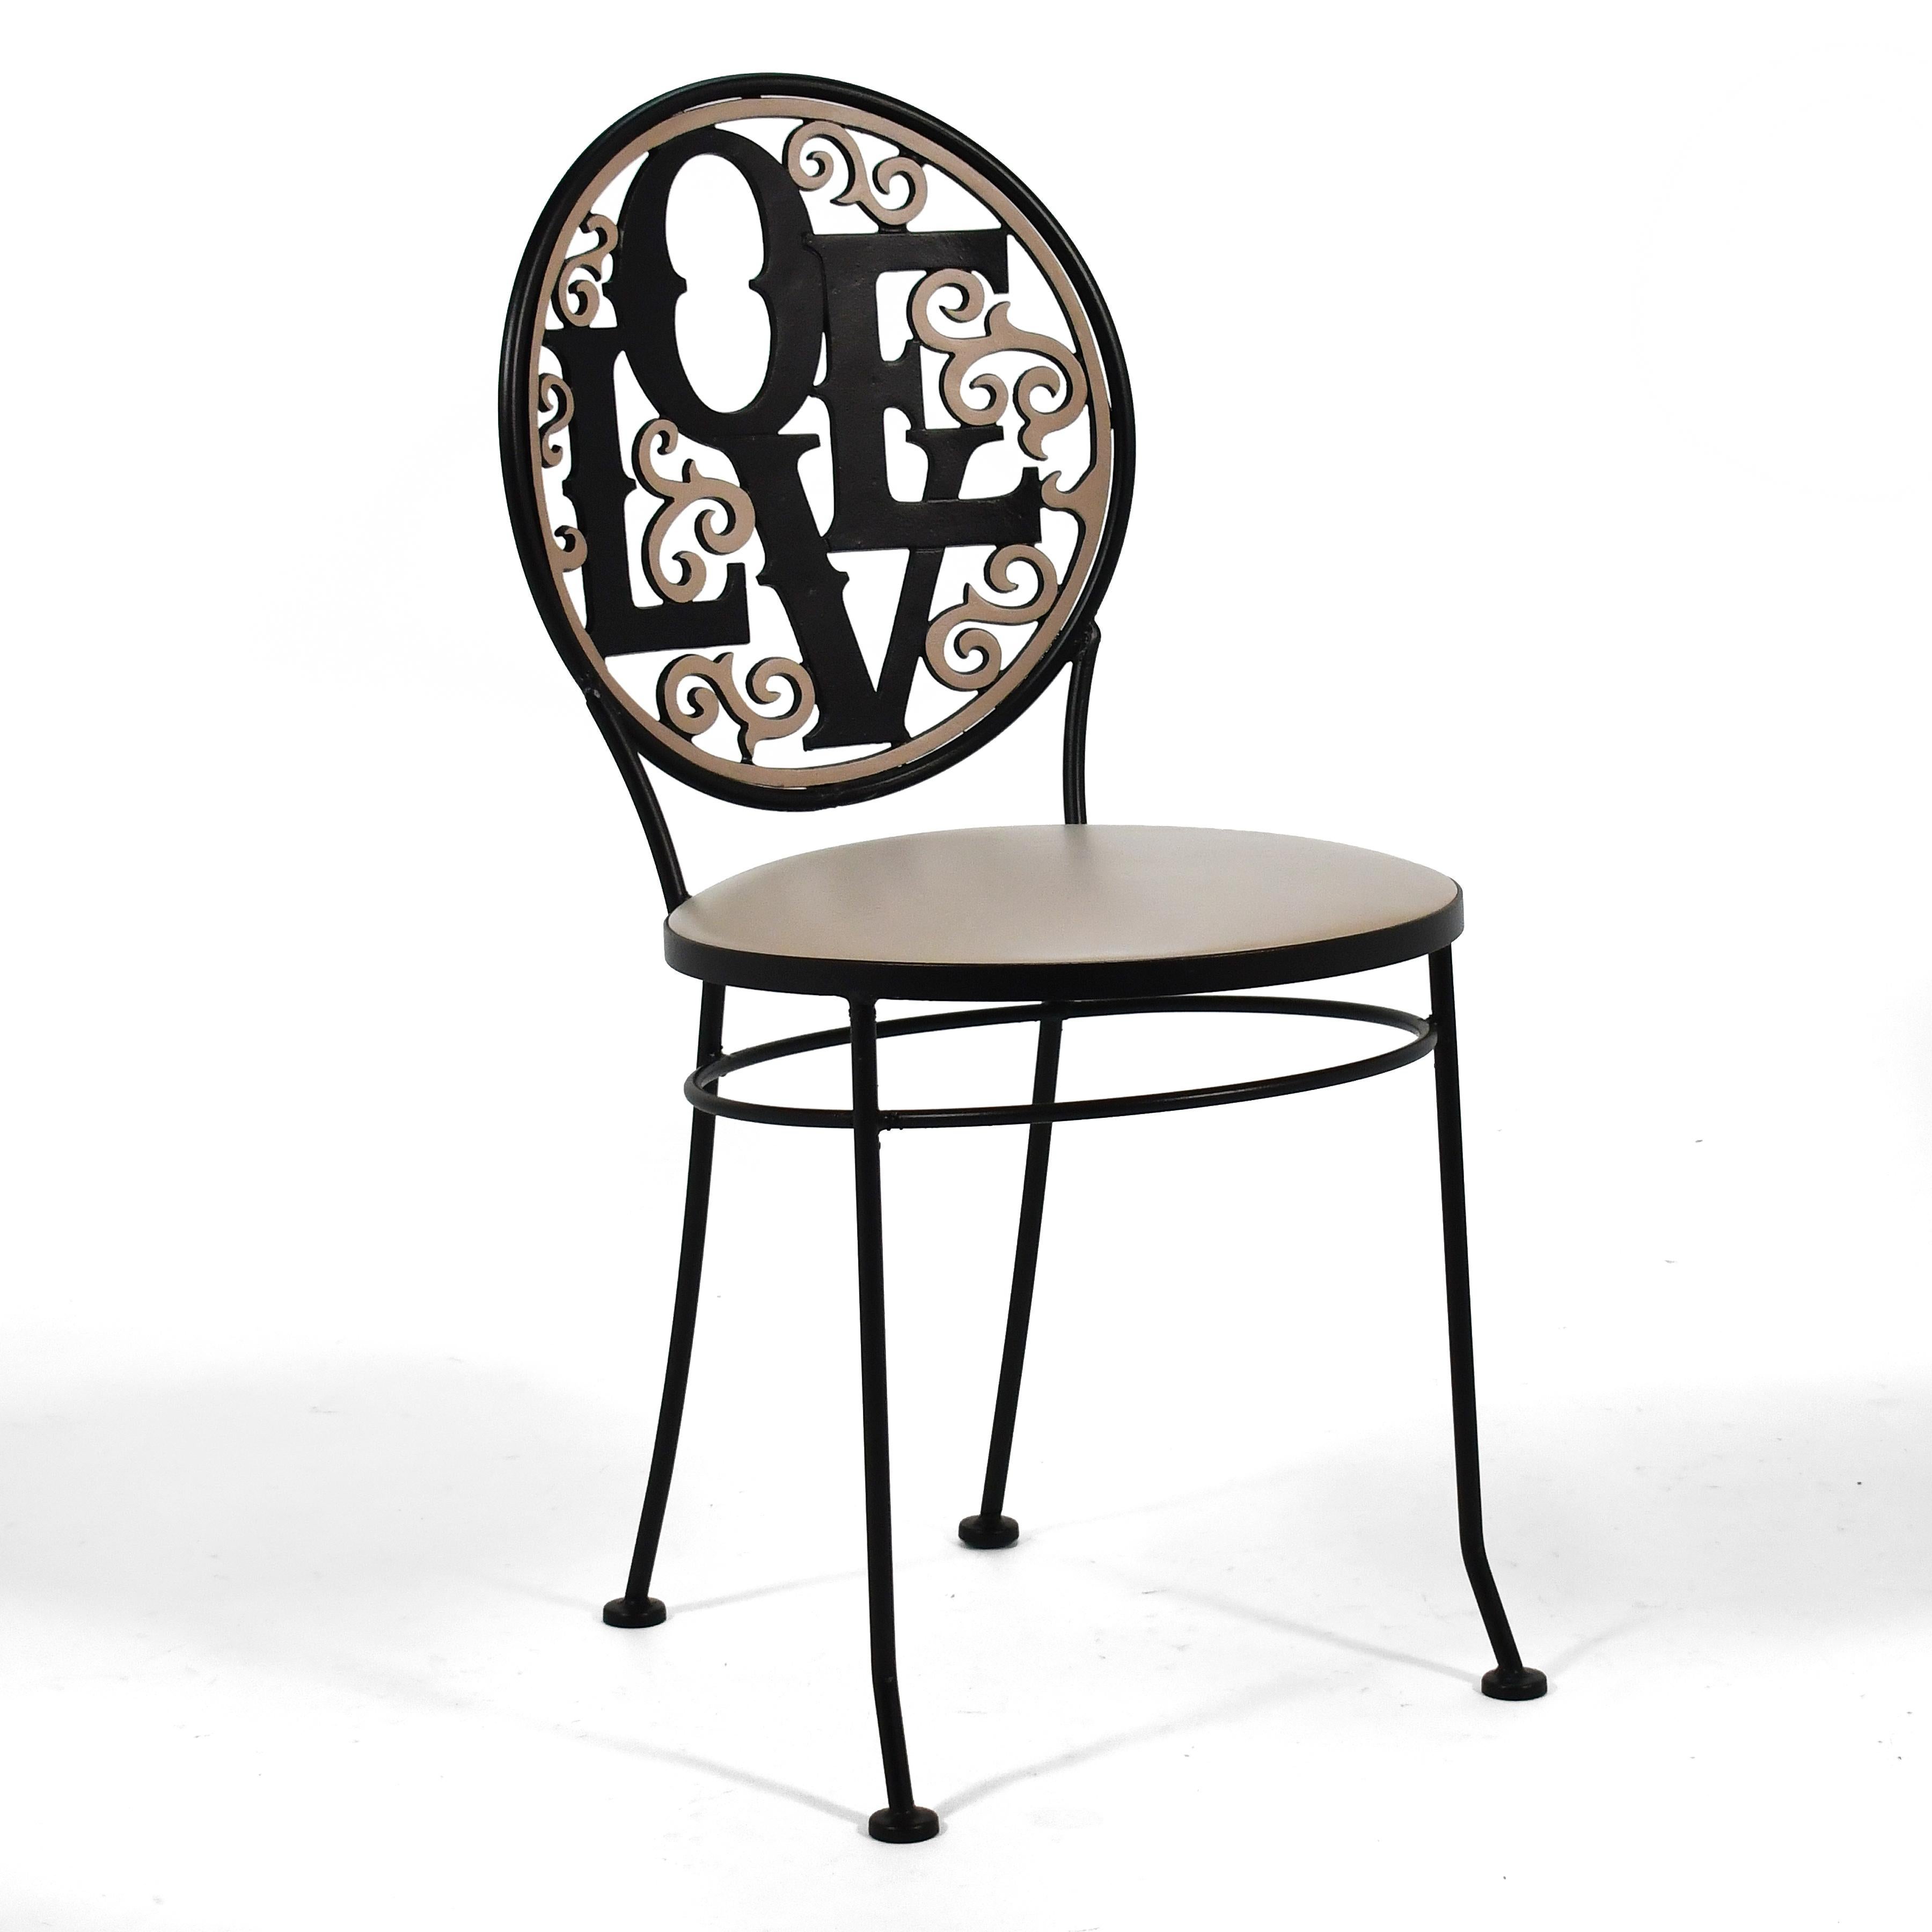 A joyful design by designer Arthur Umanoff who created many delightful works in modest materials for Shaver Howard. This wrought iron chair has a back with a playful cast design that name-checks Robert Indiana.